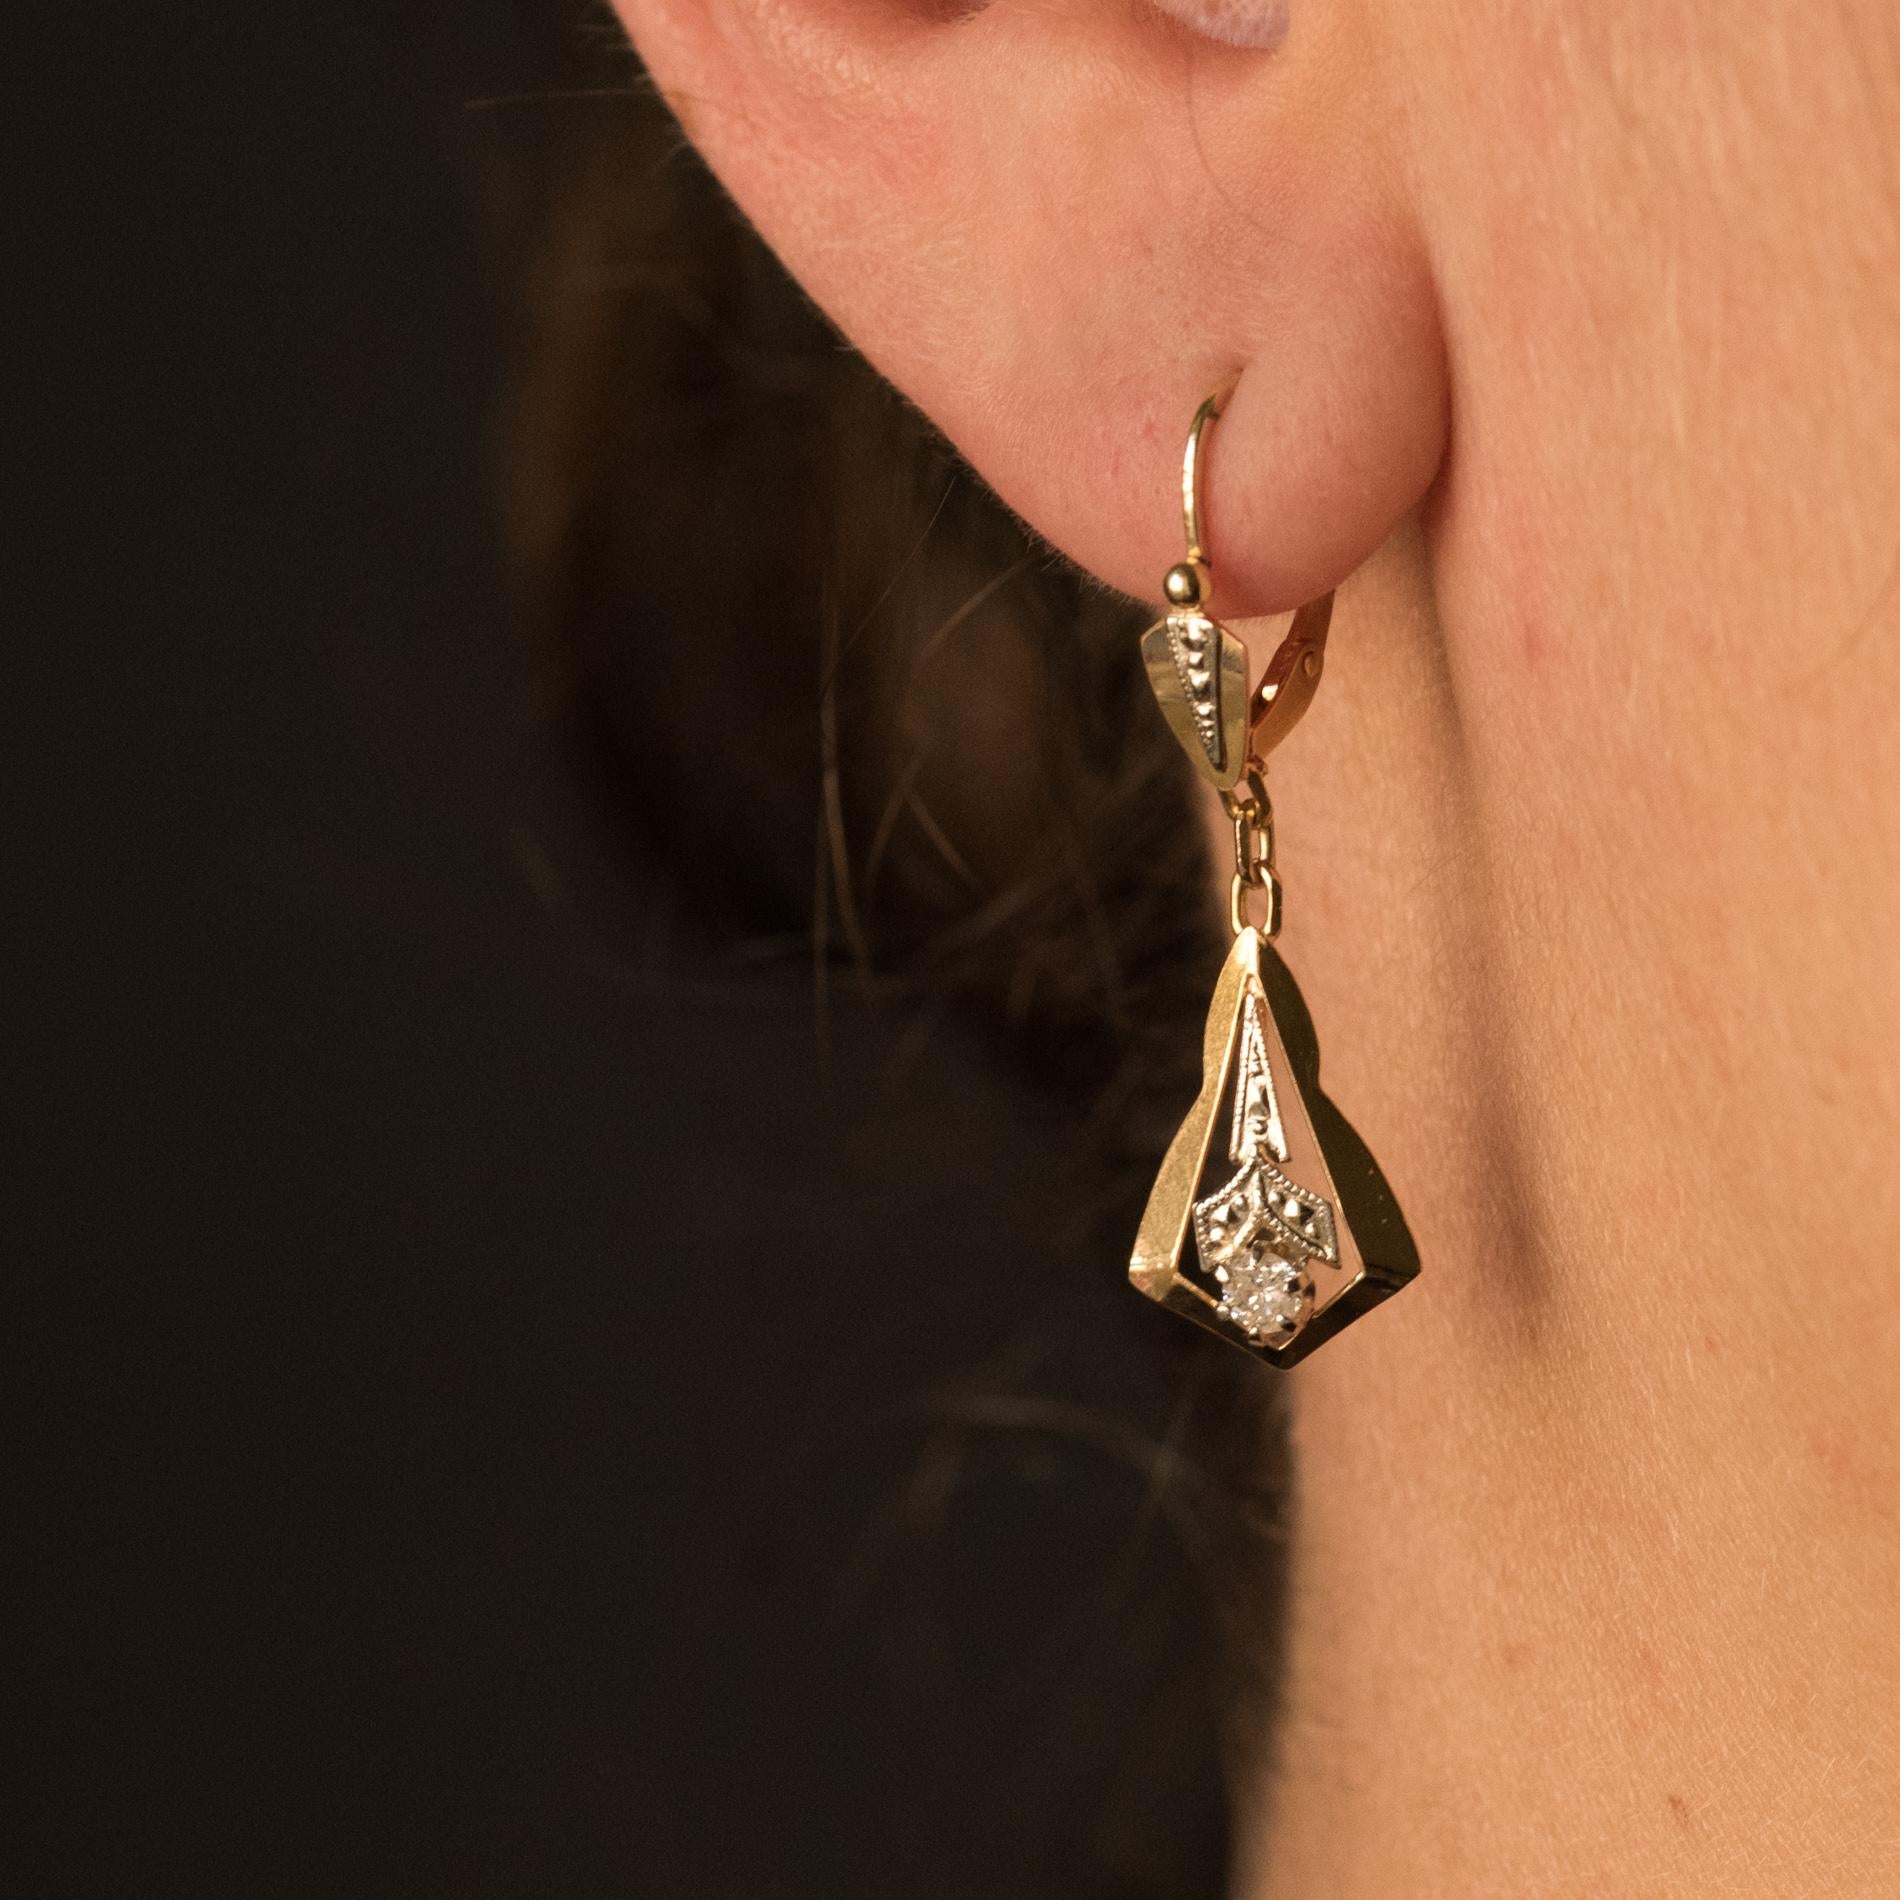 Earrings in 18 karats yellow gold and white gold, eagle's head hallmark.
Delightful dangling earrings, each consists of a sleeper set with a chiseled motif of triangular shape that retains a design 2 gold geometric pattern, pierced, chiseled and set